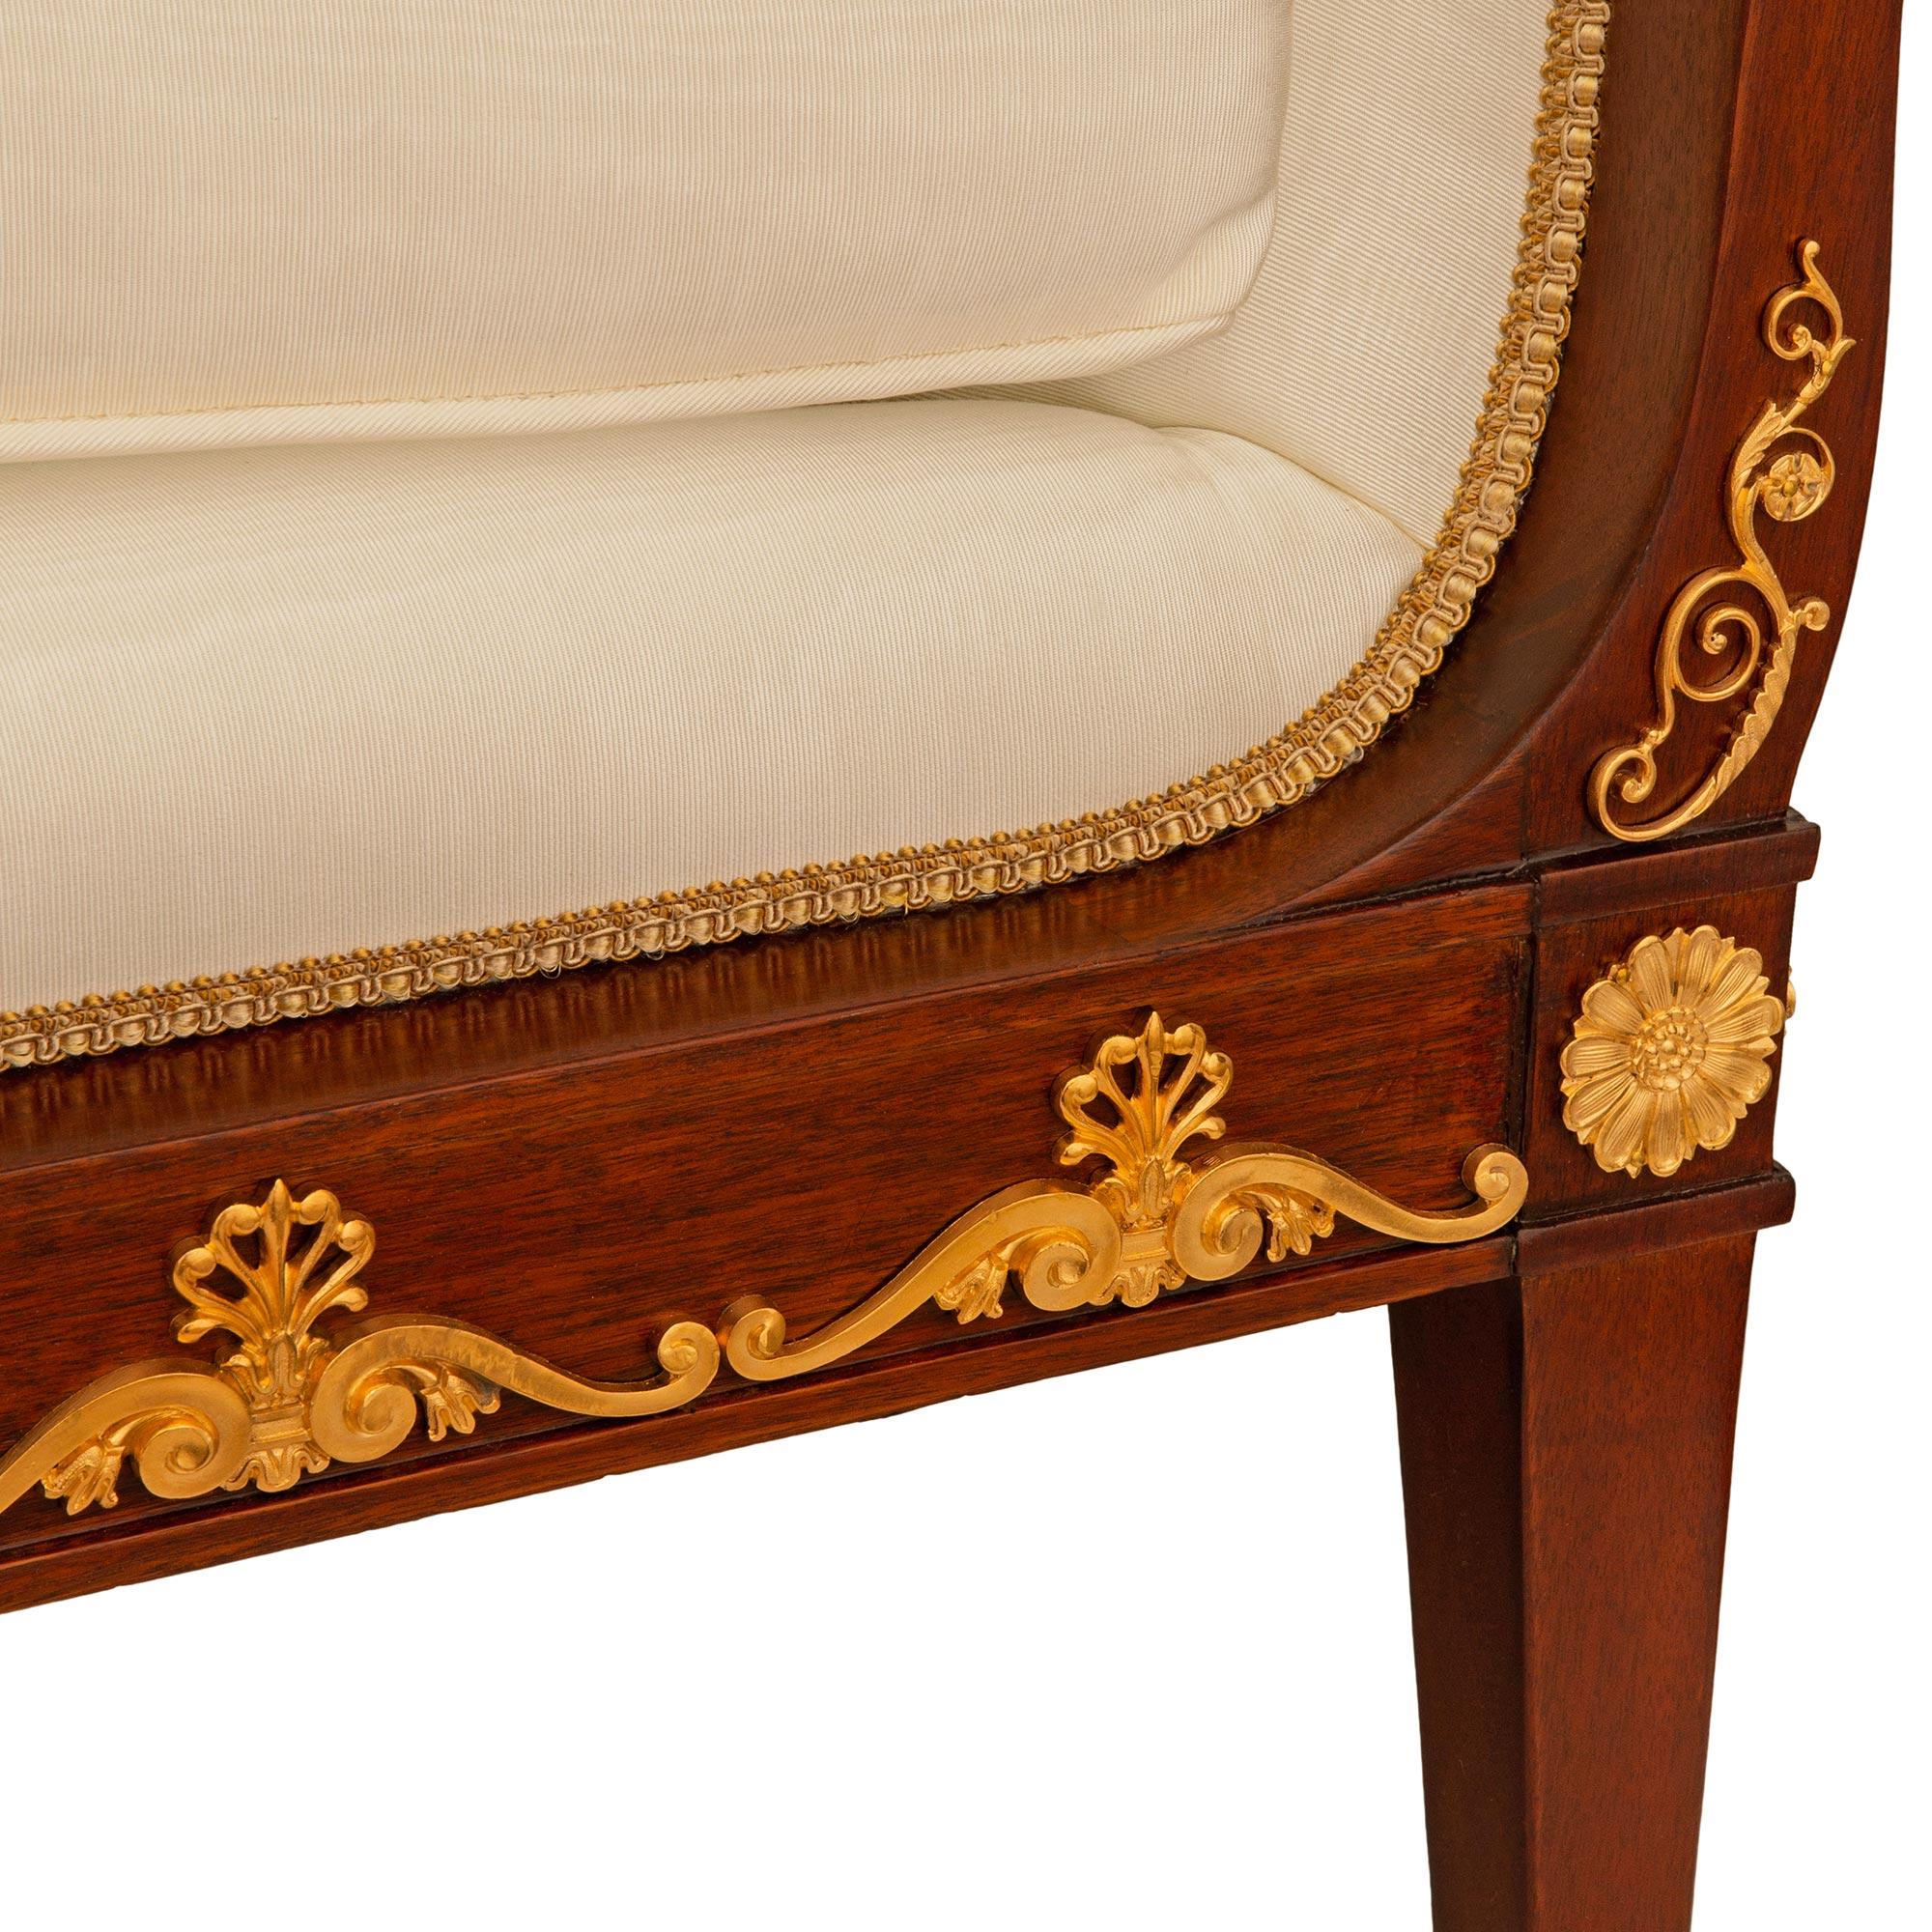 French early 19th century Empire period Mahogany and Ormolu chaise, Circa 1805 For Sale 3